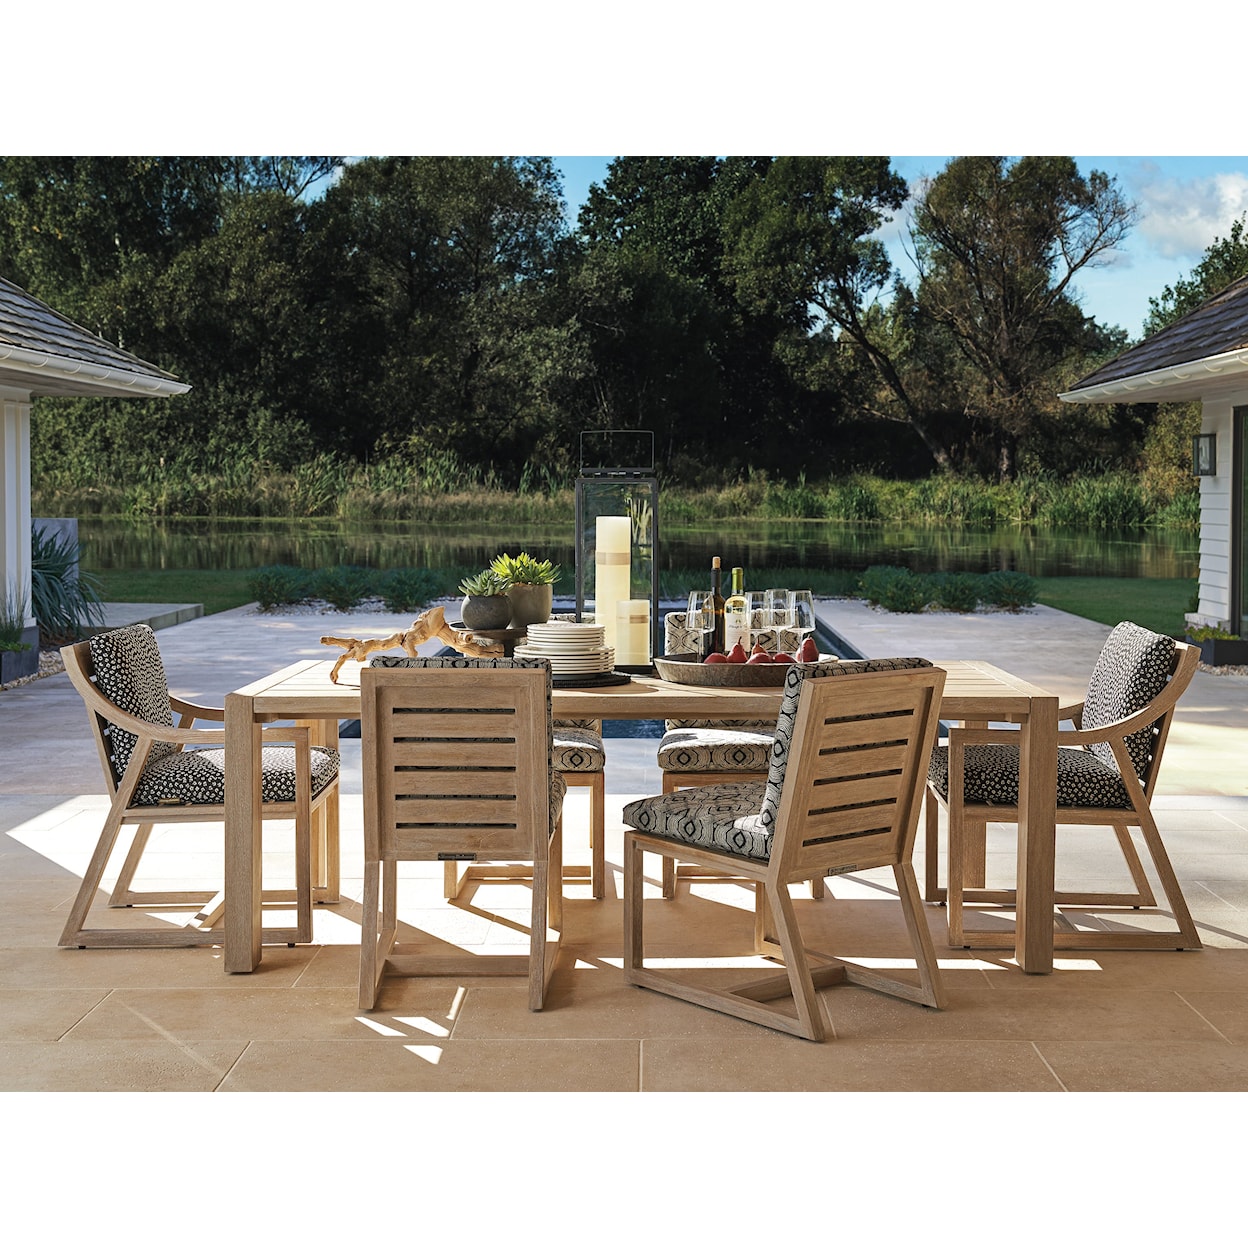 Tommy Bahama Outdoor Living Stillwater Cove 7-Piece Outdoor Dining Set